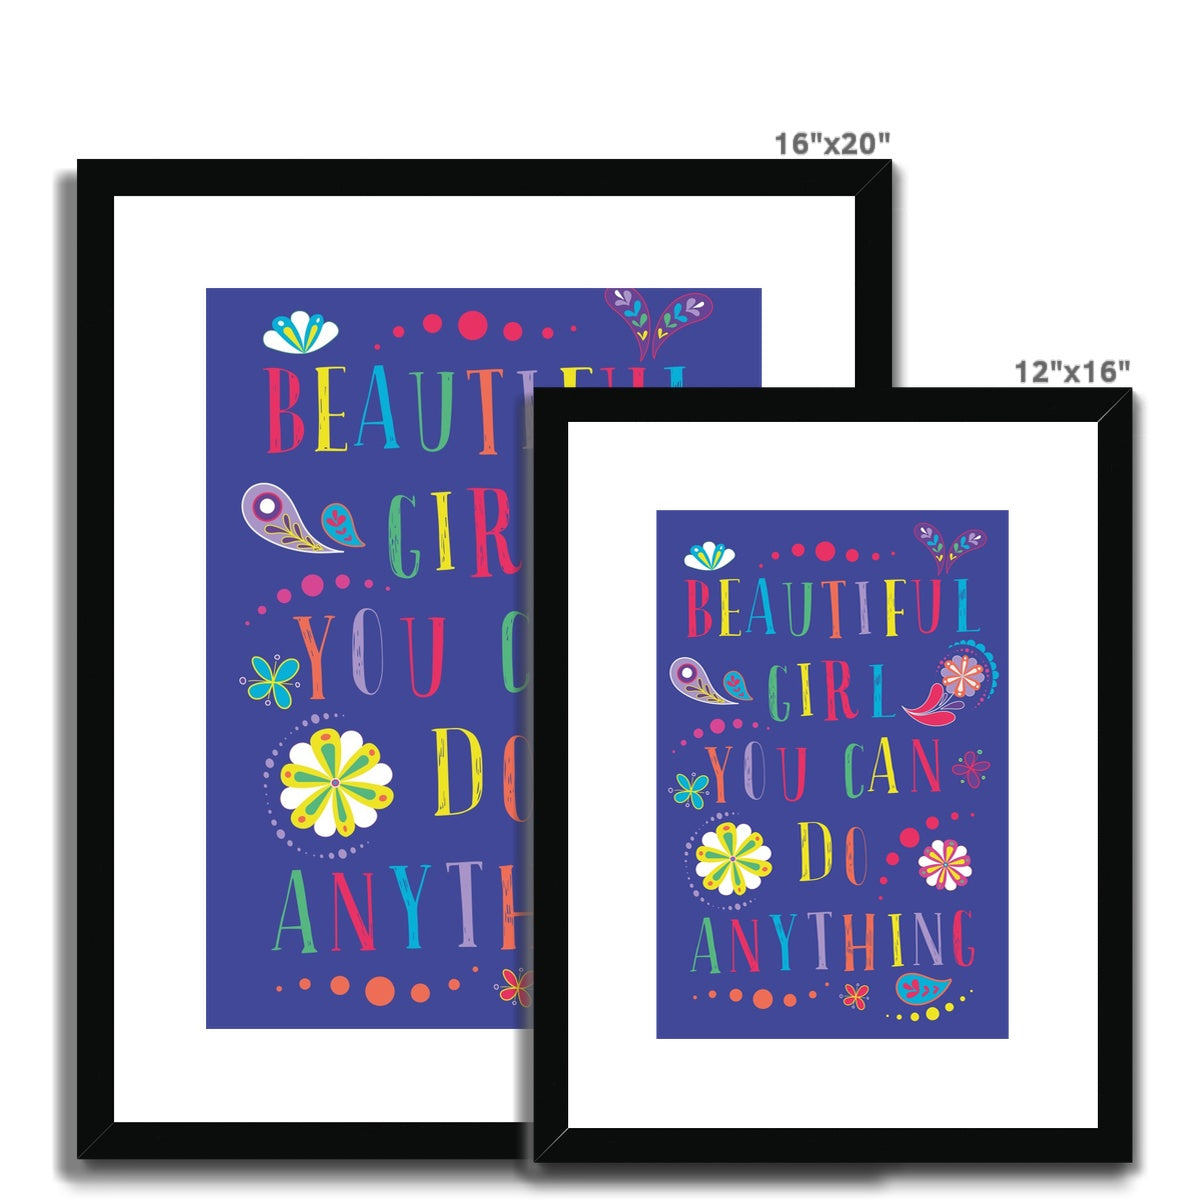 Beautiful Girl You can do anything Framed & Mounted Print